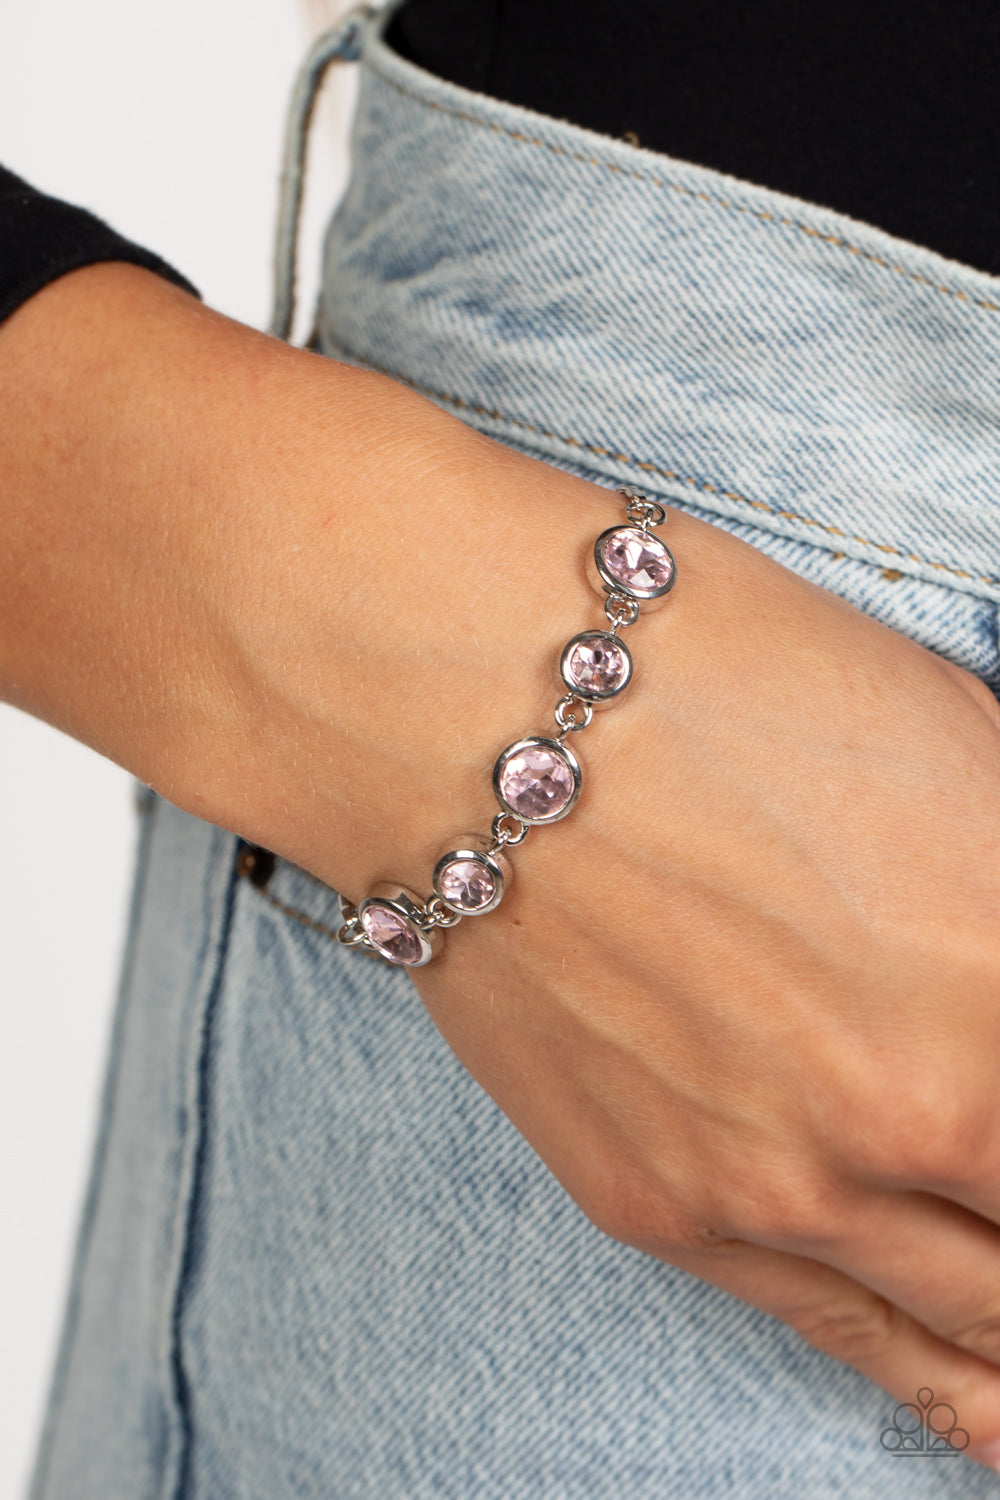 Paparazzi Accessories Classically Cultivated - Pink Varying sizes of classic, round, brilliant-cut pink rhinestones set in thick, circular, silver frames link together around the wrist with glamorous glimmer. The rhinestones attach to a dainty strand of s